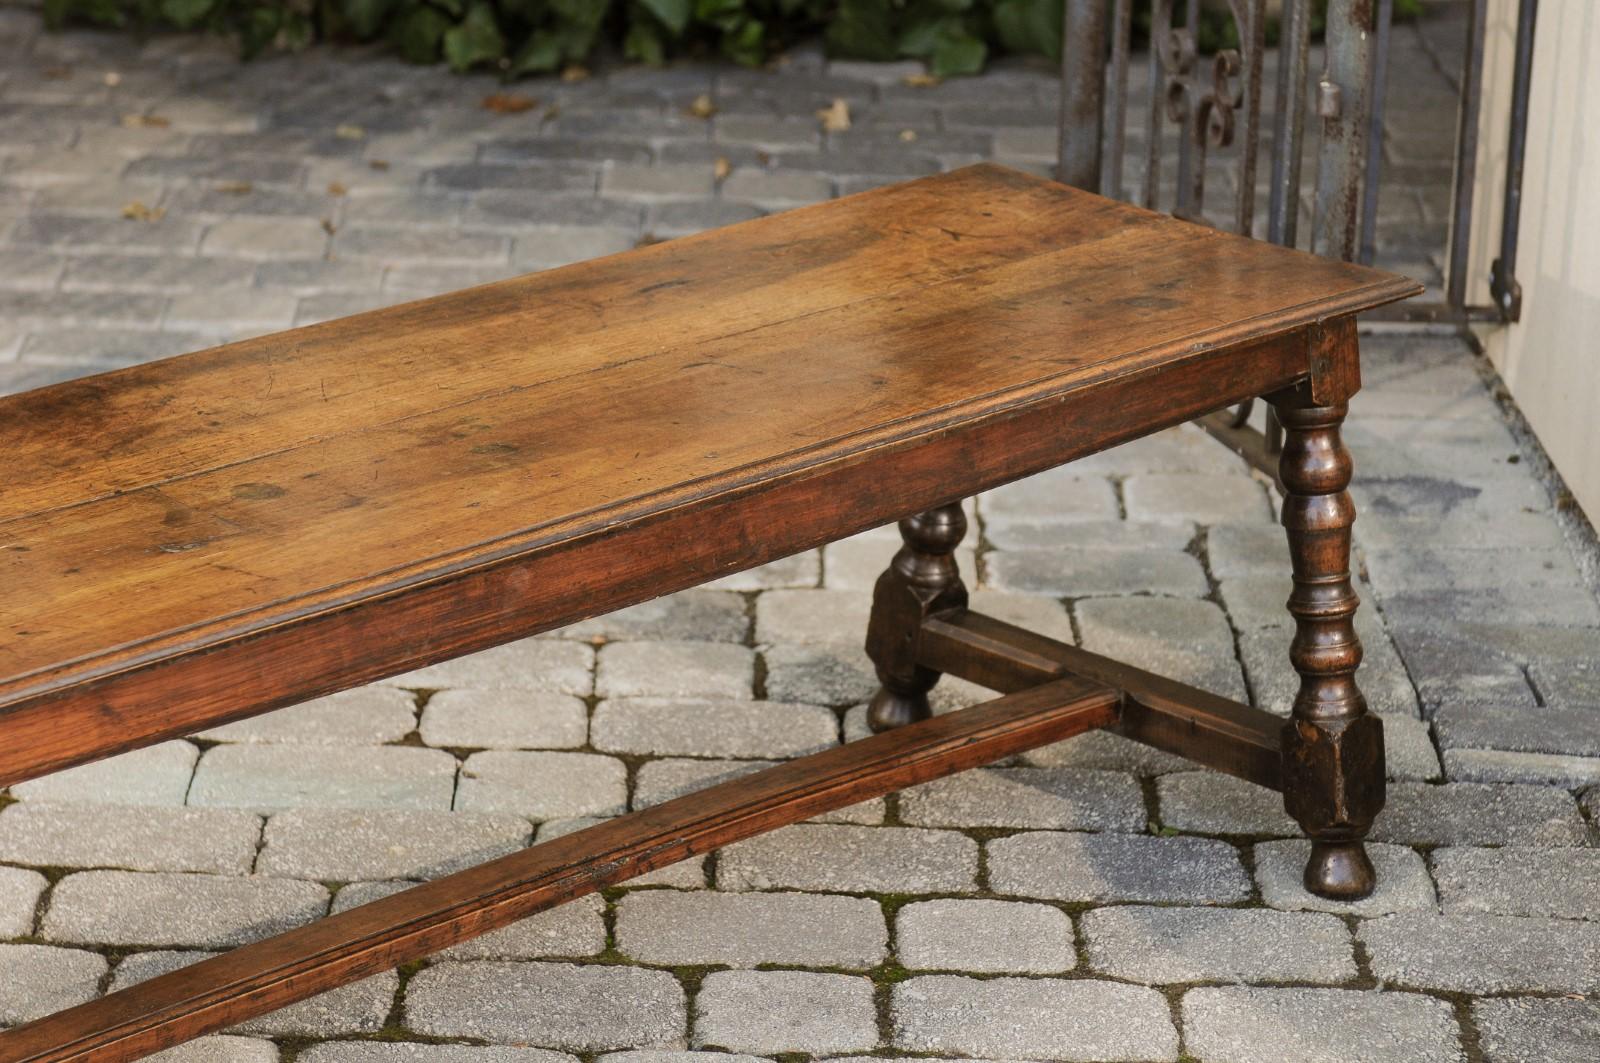 Italian 1800s Walnut Bench with Turned Legs and H-Form Cross Stretcher 1